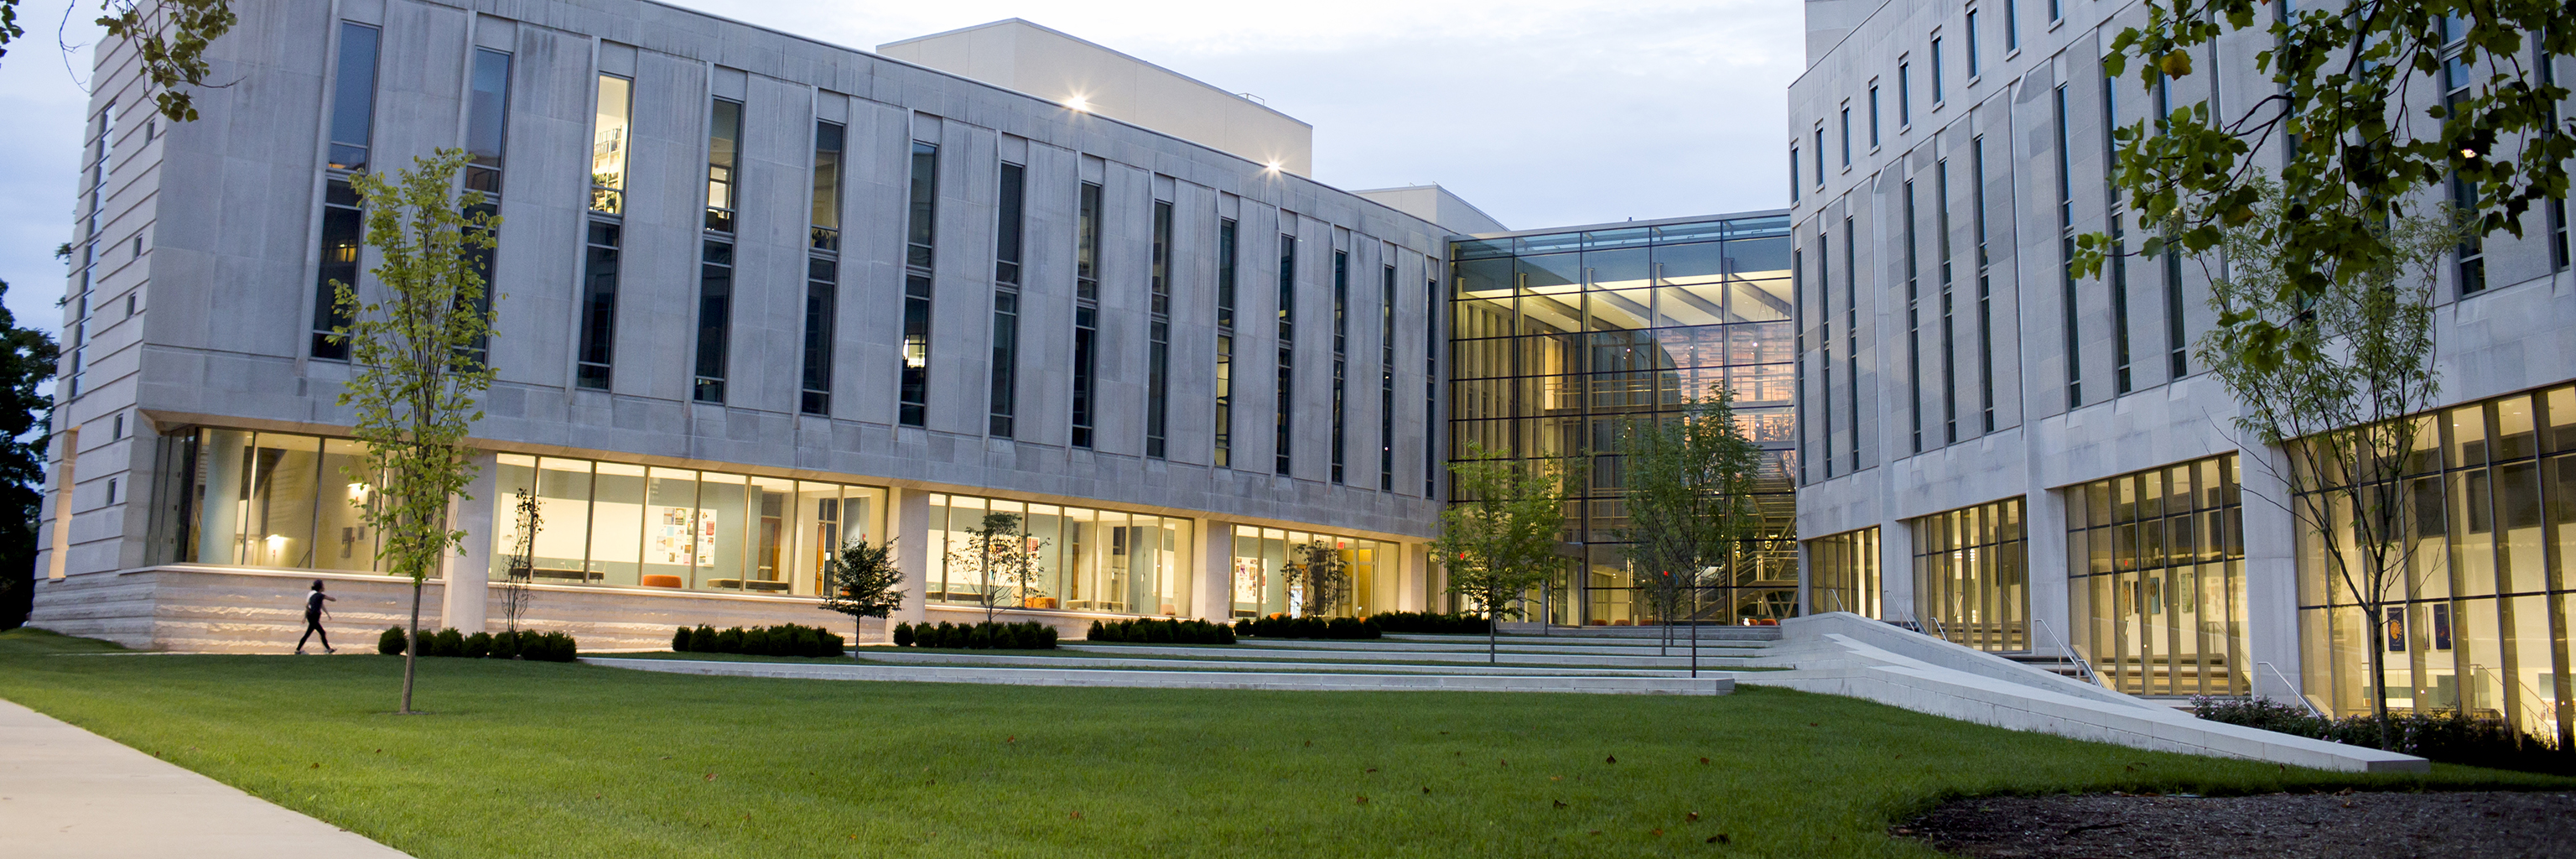 Image of the outside of the Global and International Studies building on the Indiana University Bloomington campus.